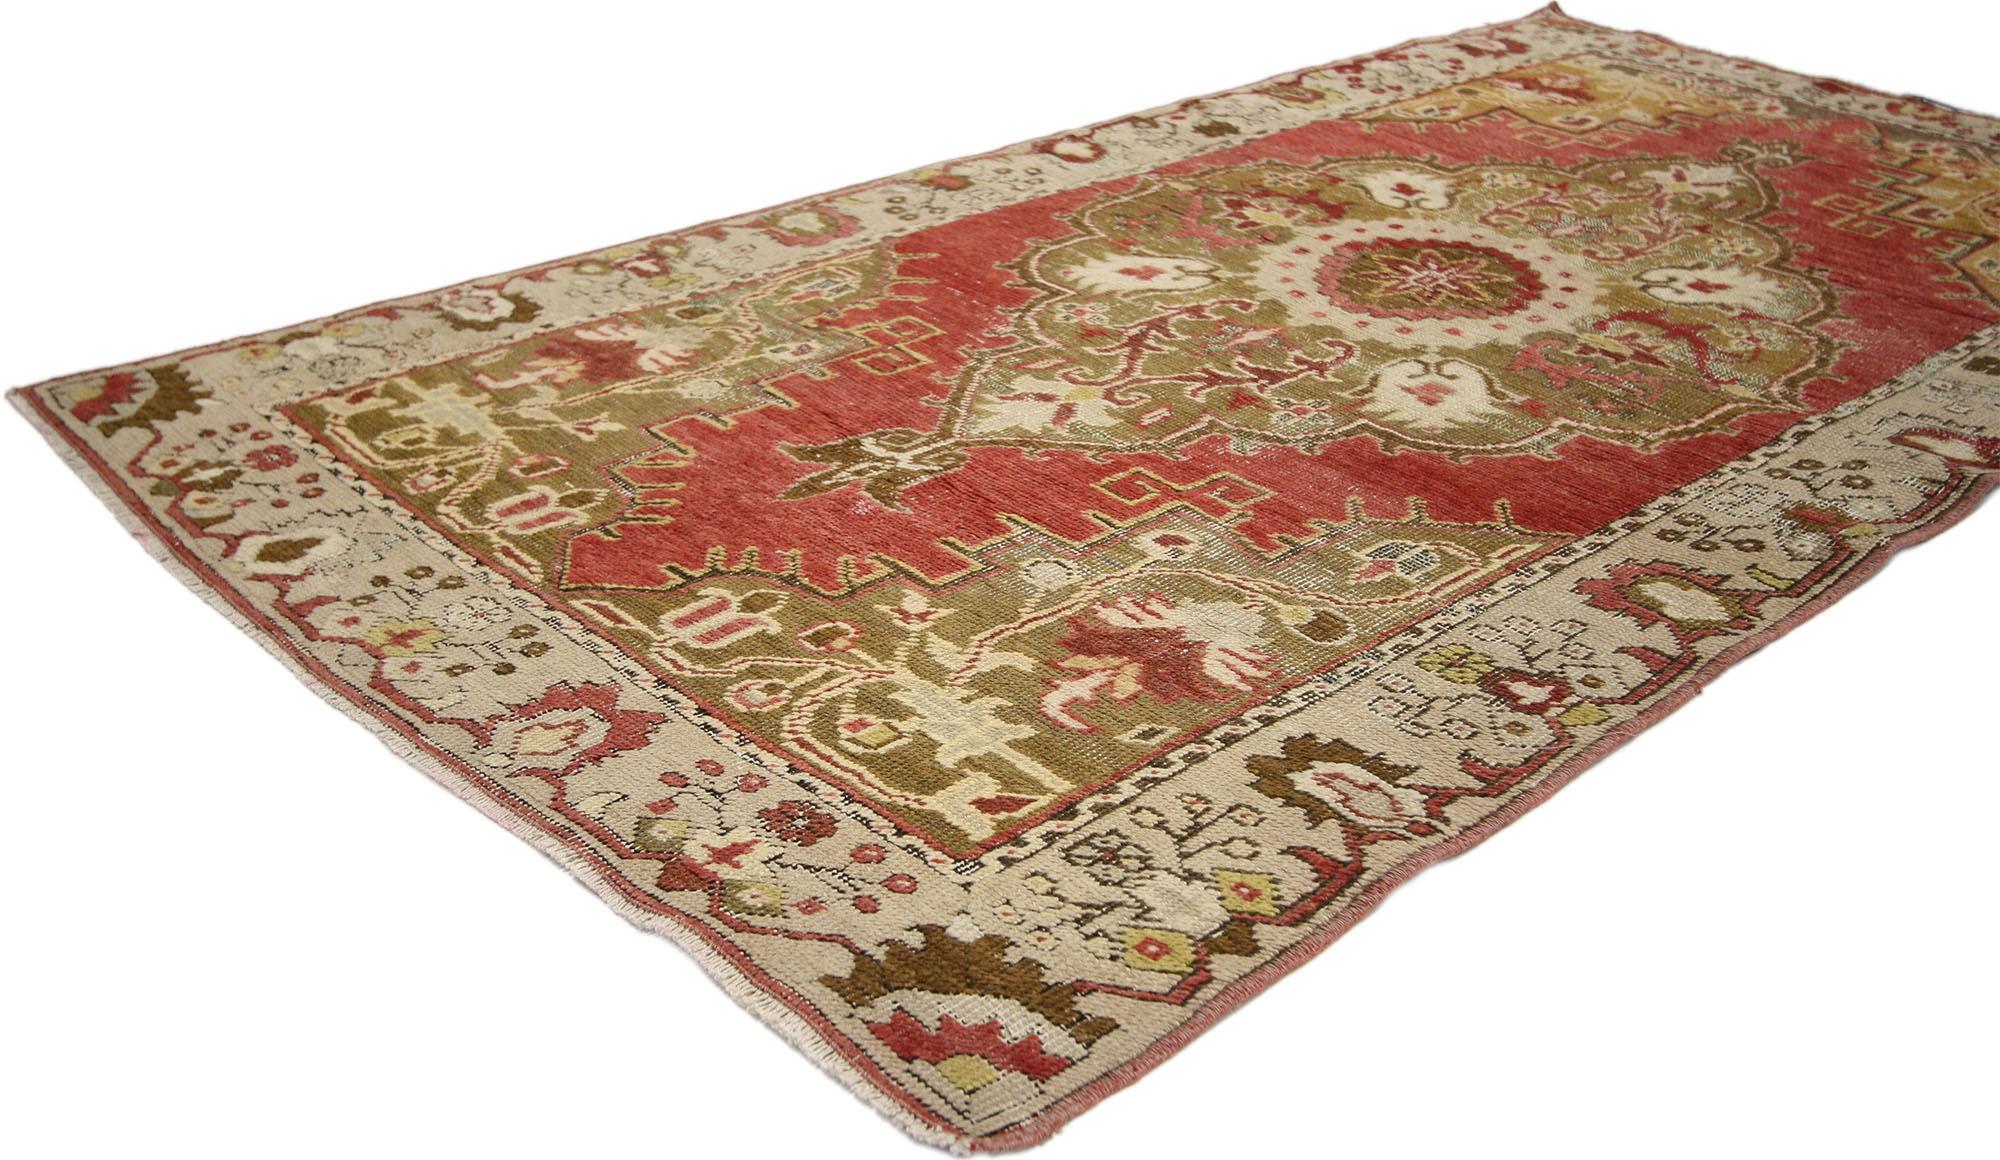 Wool Rustic Rococo Style Distressed Vintage Turkish Oushak Rug, Entry or Foyer Rug For Sale